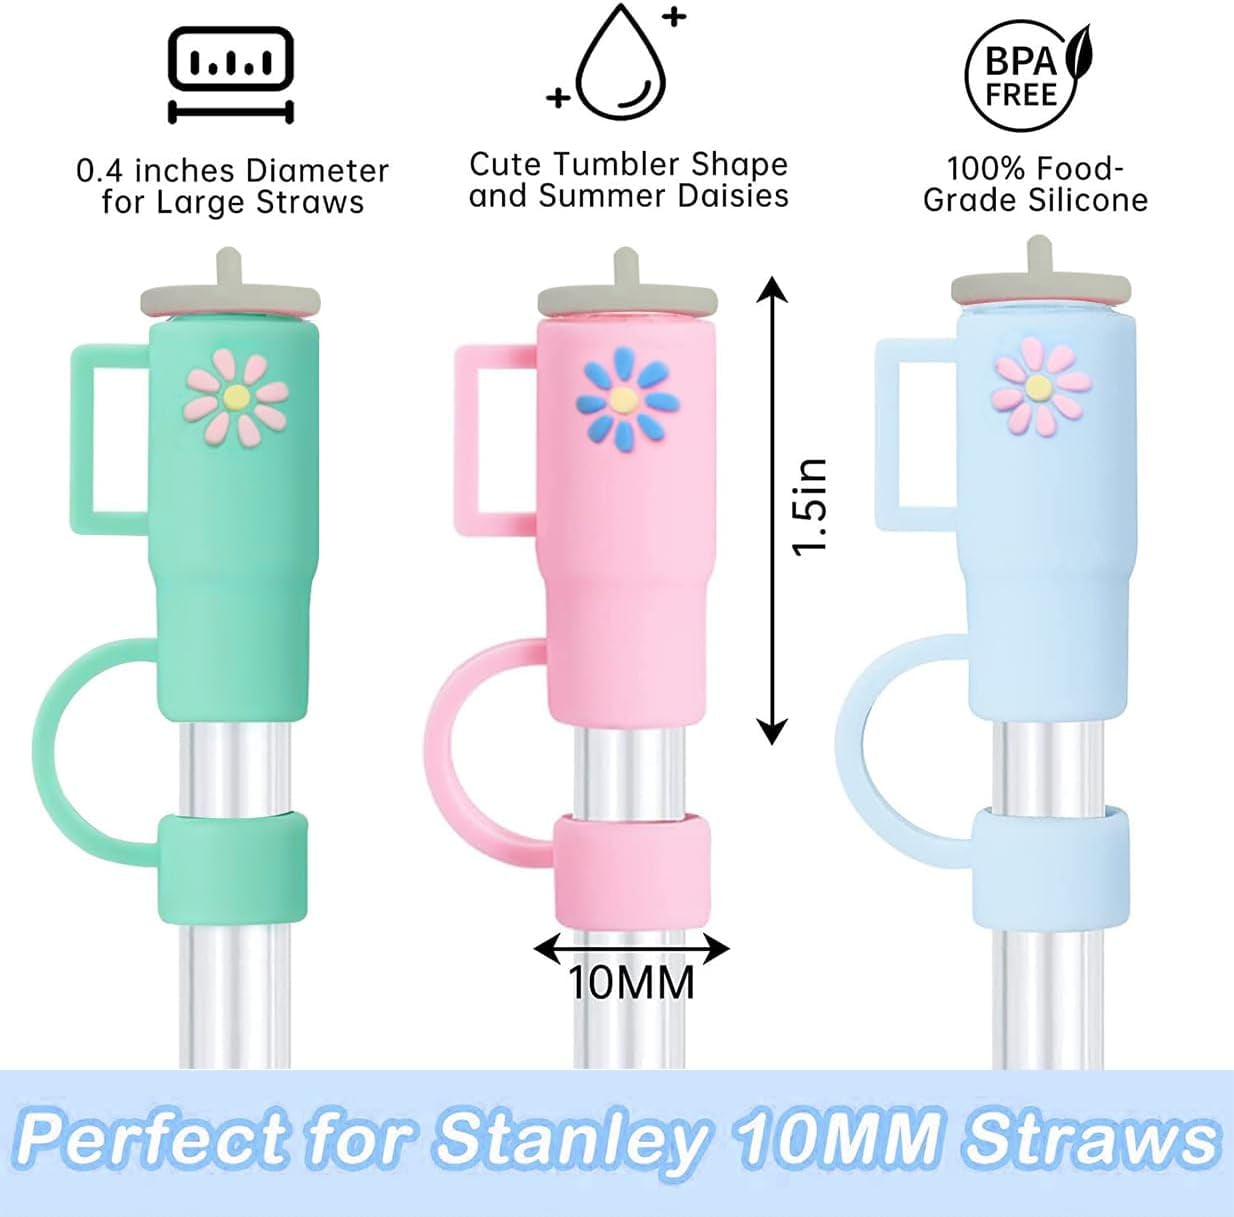 stanley cup straw cover flower｜TikTok Search